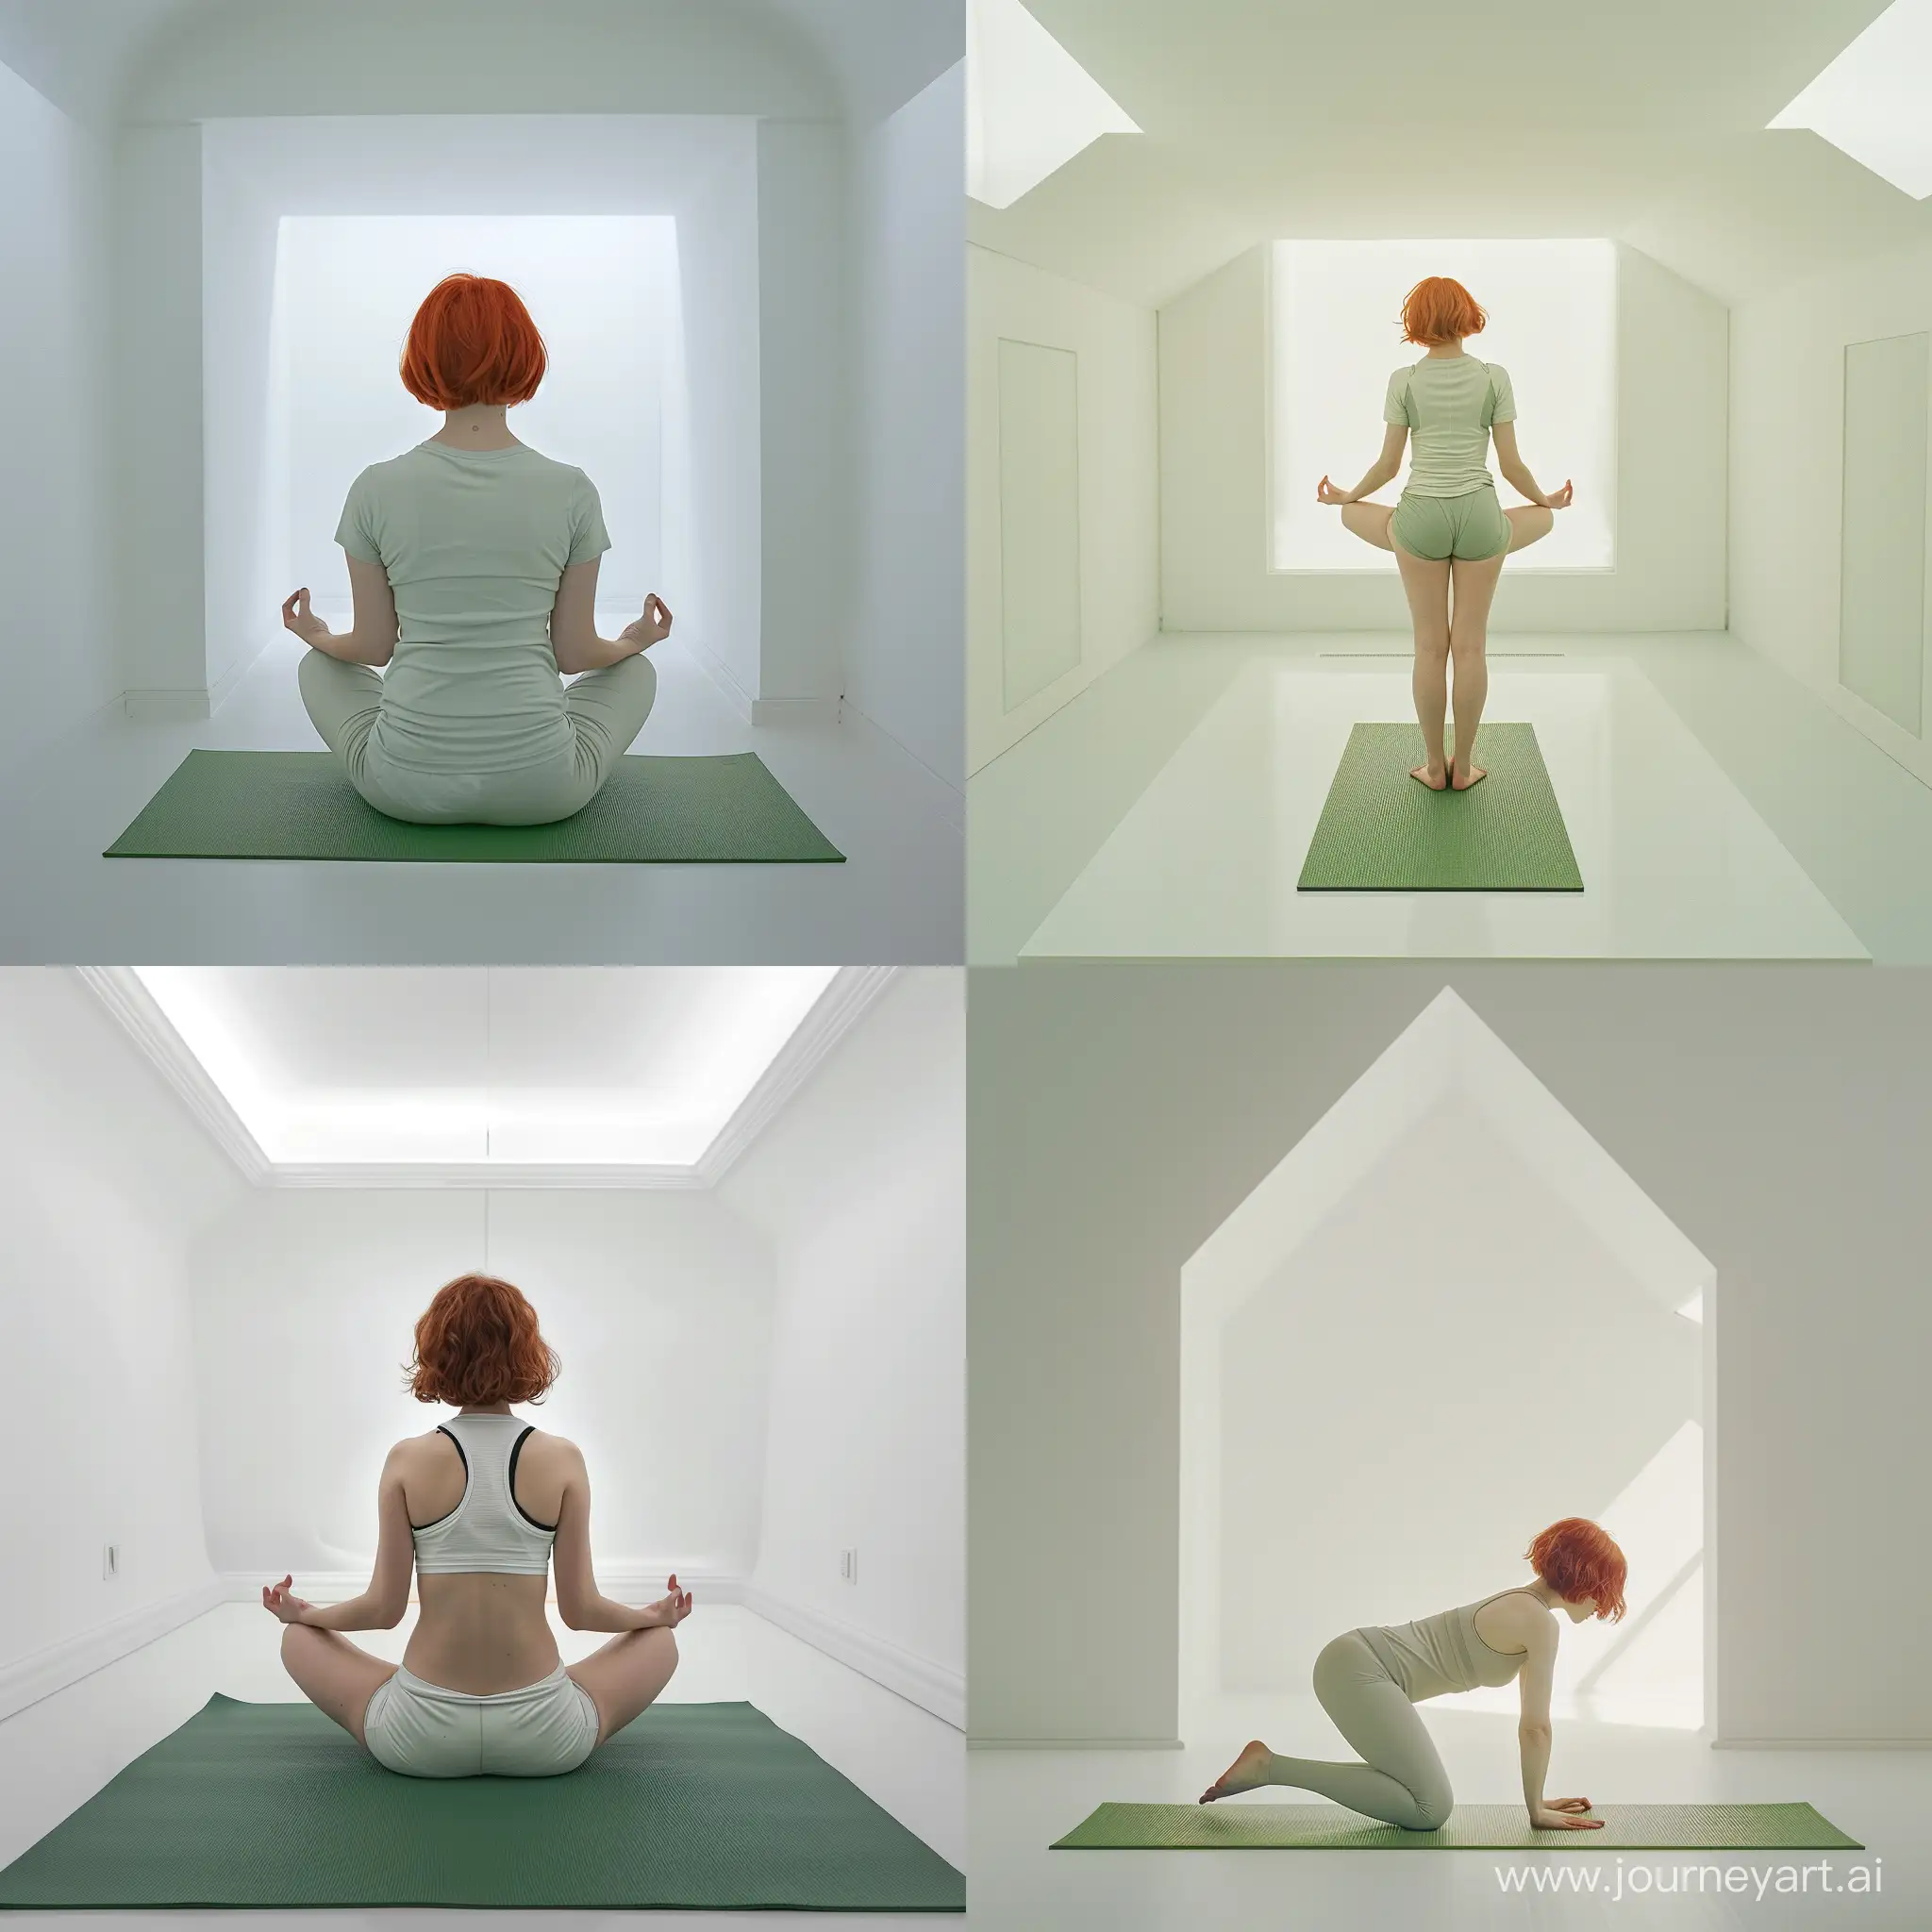 Realistic-Portrait-of-RedHaired-Girl-Practicing-Yoga-in-White-Room